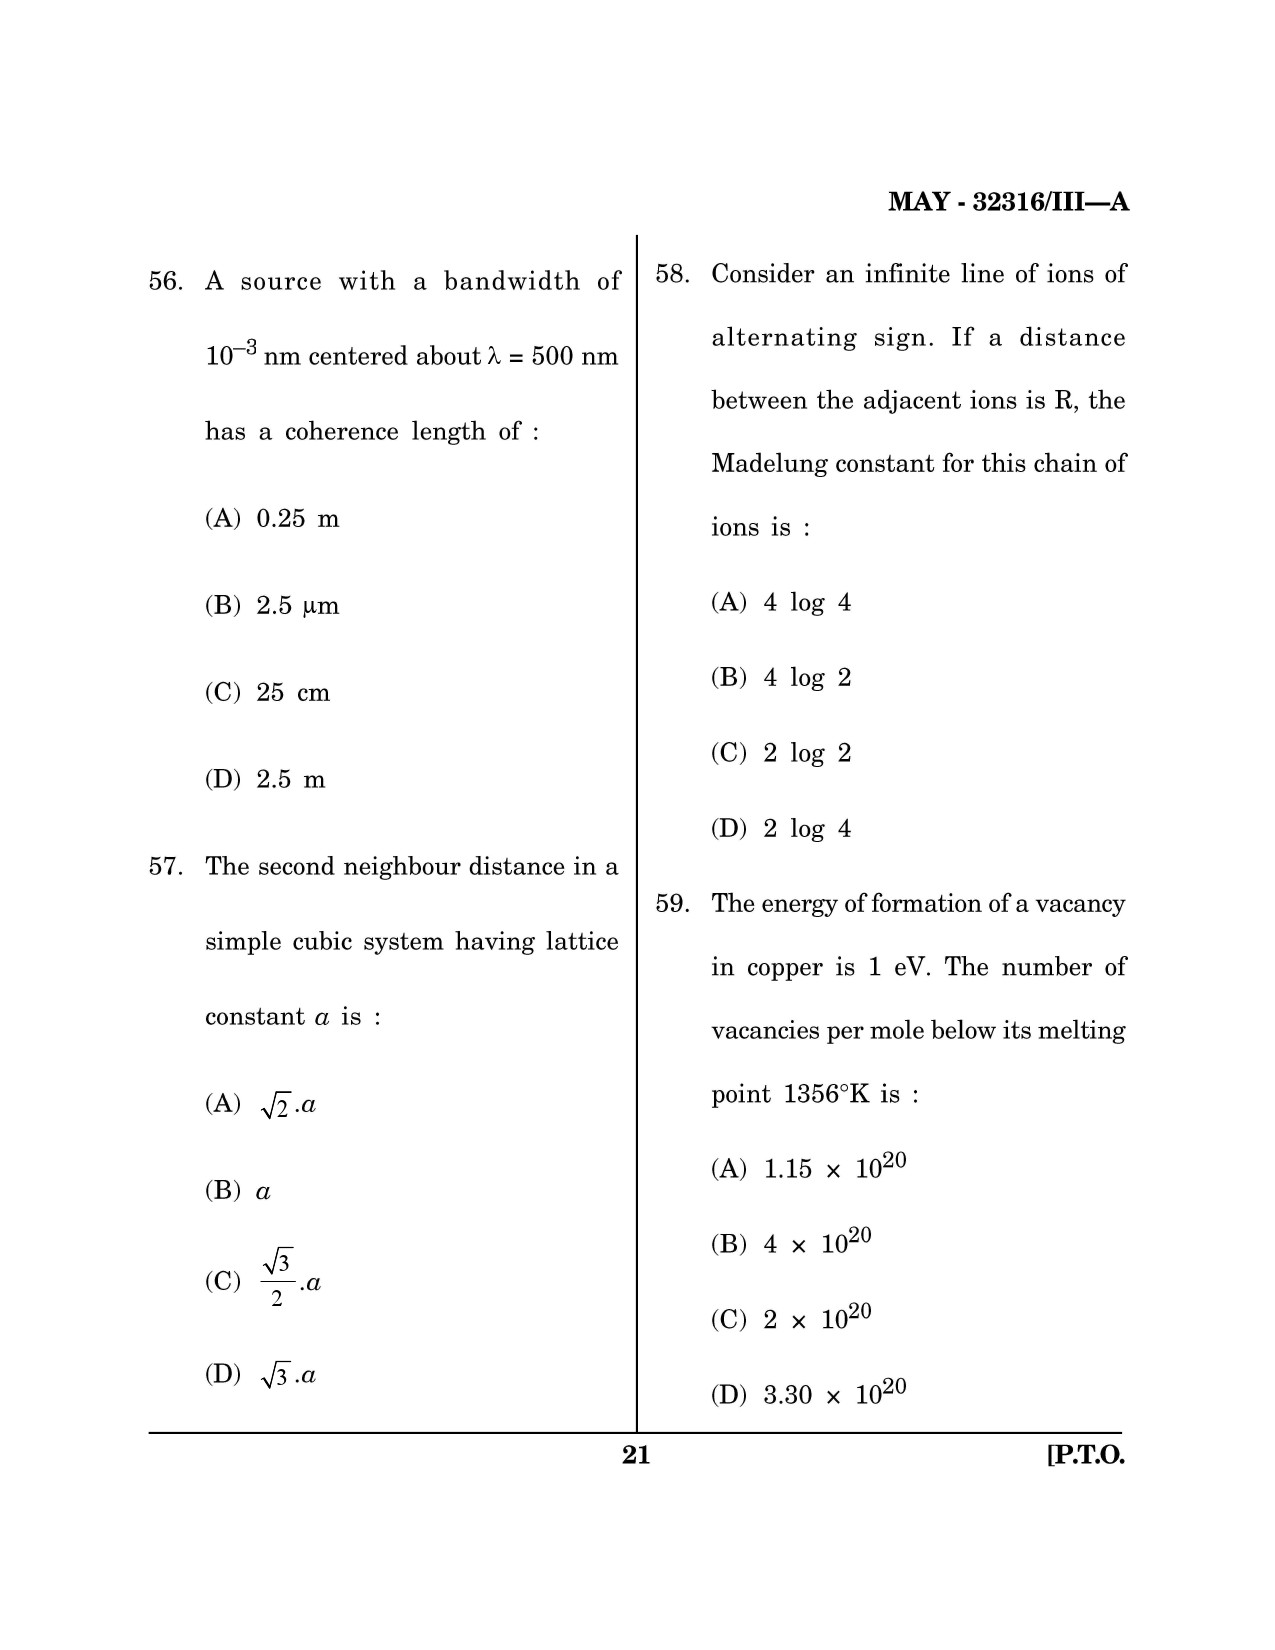 Maharashtra SET Physical Science Question Paper III May 2016 20